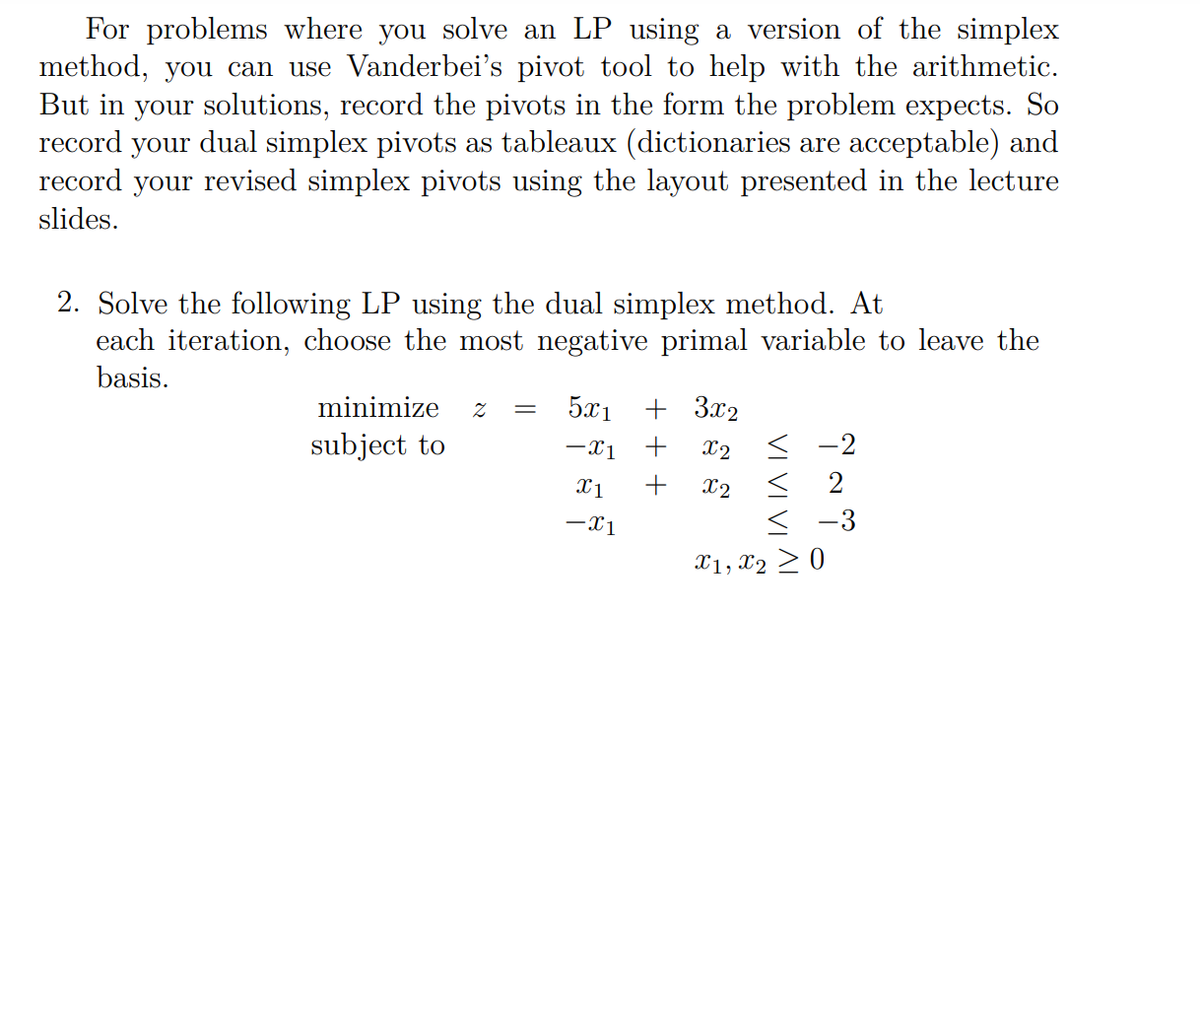 For problems where you solve an LP using a version of the simplex
method, you can use Vanderbei's pivot tool to help with the arithmetic.
But in your solutions, record the pivots in the form the problem expects. So
record your dual simplex pivots as tableaux (dictionaries are acceptable) and
record your revised simplex pivots using the layout presented in the lecture
slides.
2. Solve the following LP using the dual simplex method. At
each iteration, choose the most negative primal variable to leave the
basis.
minimize
5x1
+ 3x2
subject to
-x1
+
X2
< -2
X1
+
X2
2
-x1
< -3
X1, X2 > 0
